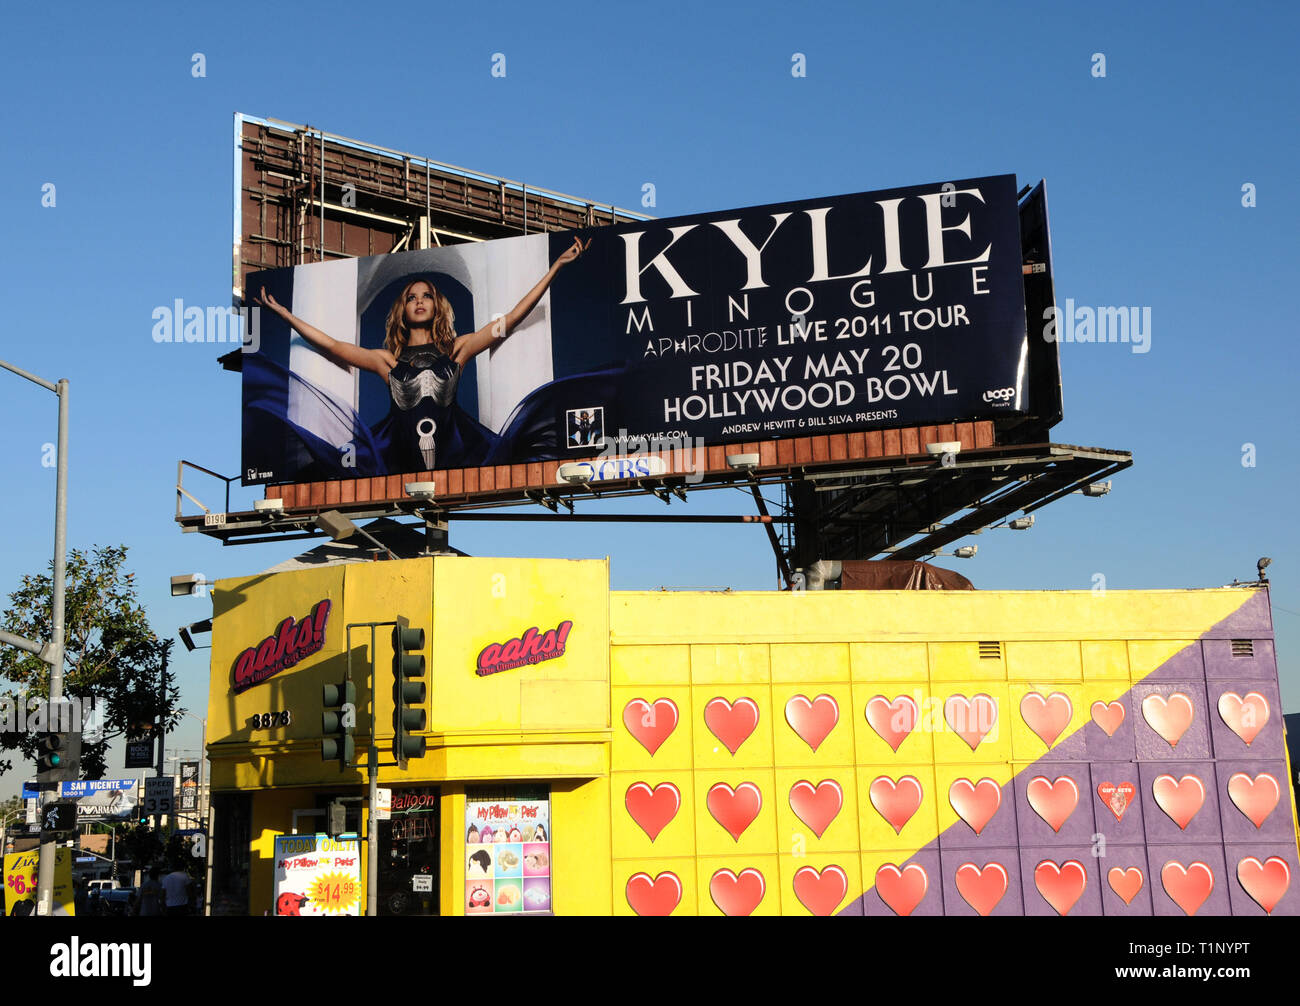 LOS ANGELES, CA - MAY 20: A general view of atmosphere of Kylie Minogue Aphrodite Live Tour Billboard on May 20, 2011 on Sunset Blvd in Los Angeles, California. Photo by Barry King/Alamy Stock Photo Stock Photo